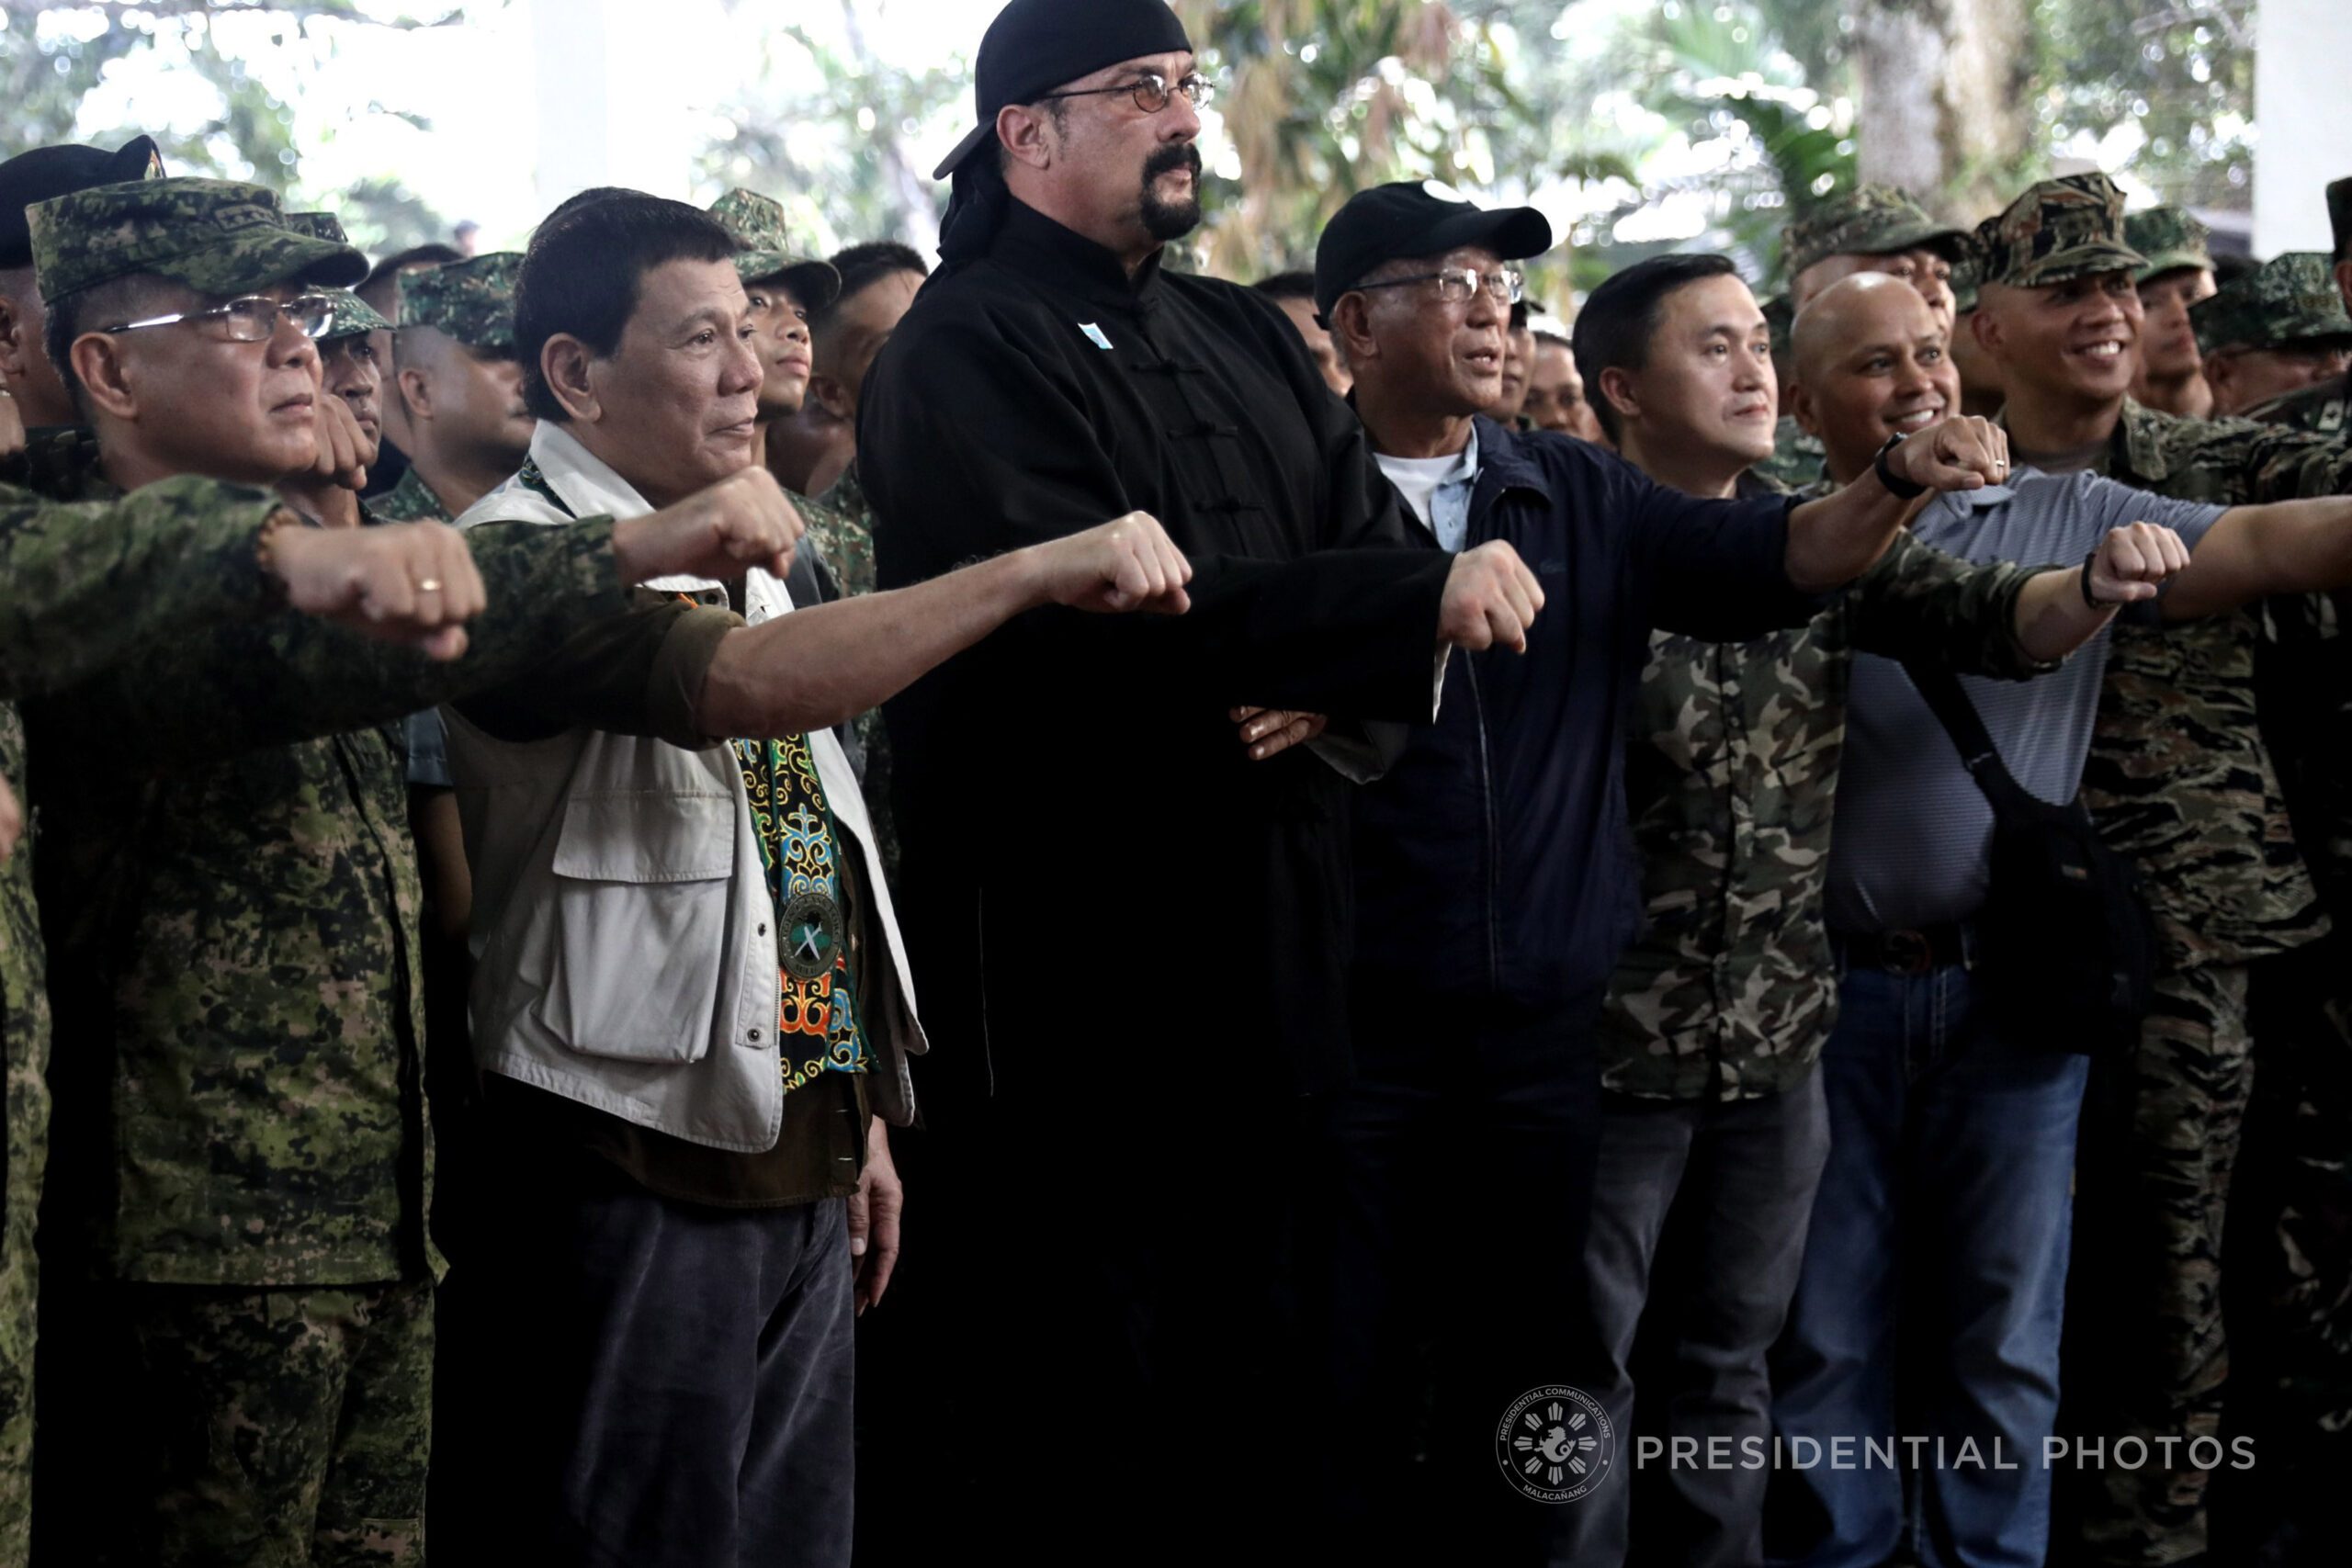 Action star Steven Seagal rallies troops in Jolo for Duterte